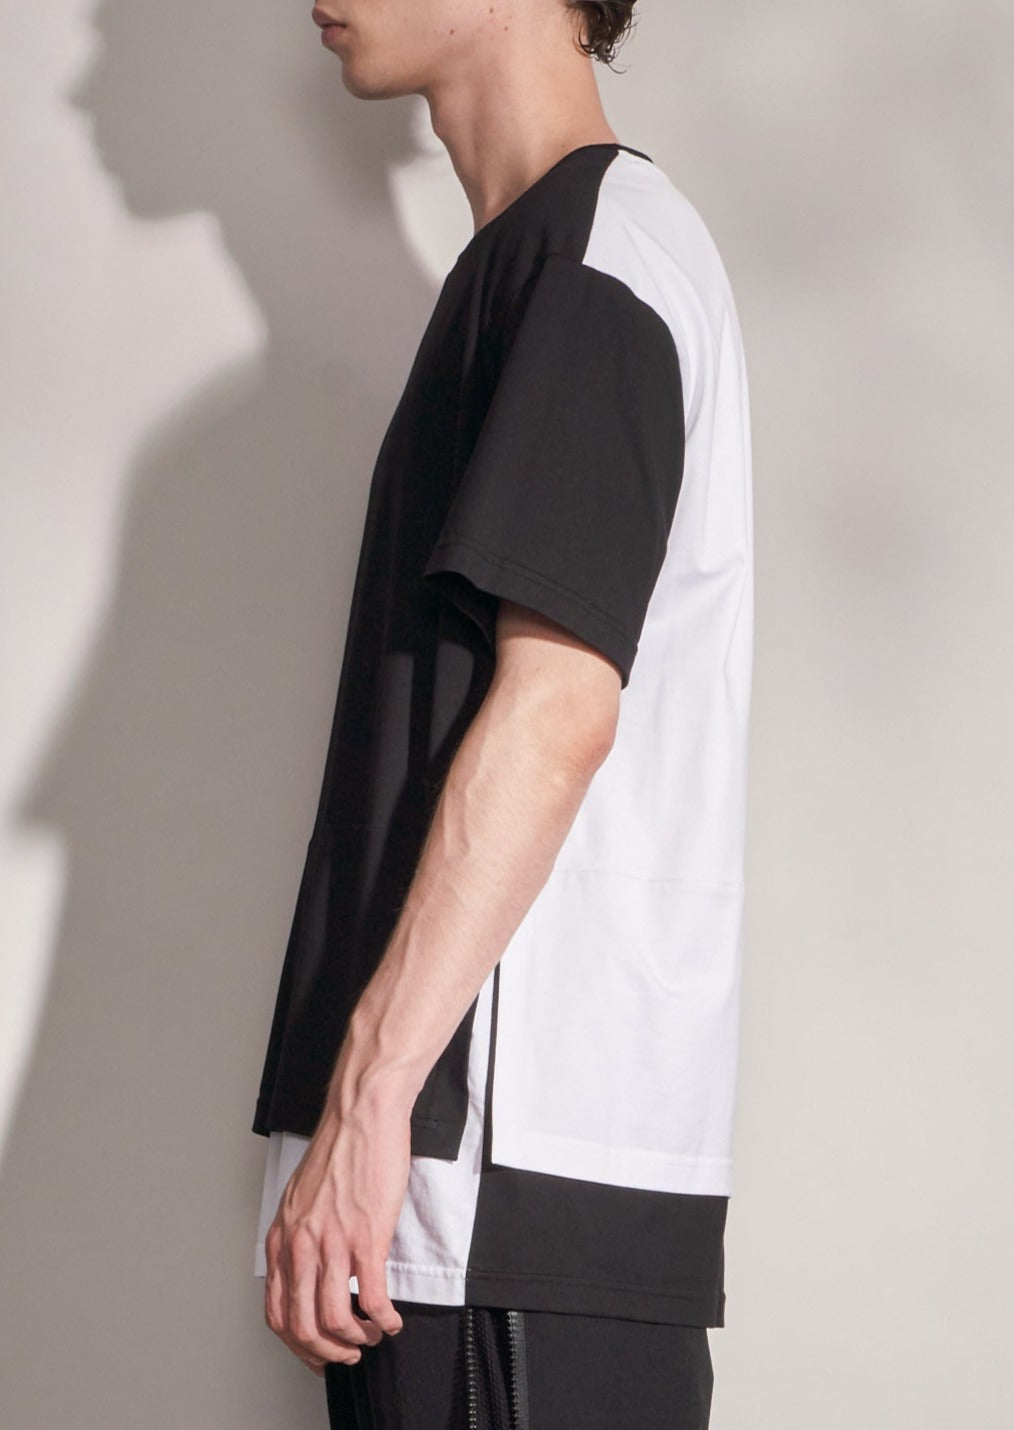 Fake Layer Tee With Color Contrast – HARRISON WONG